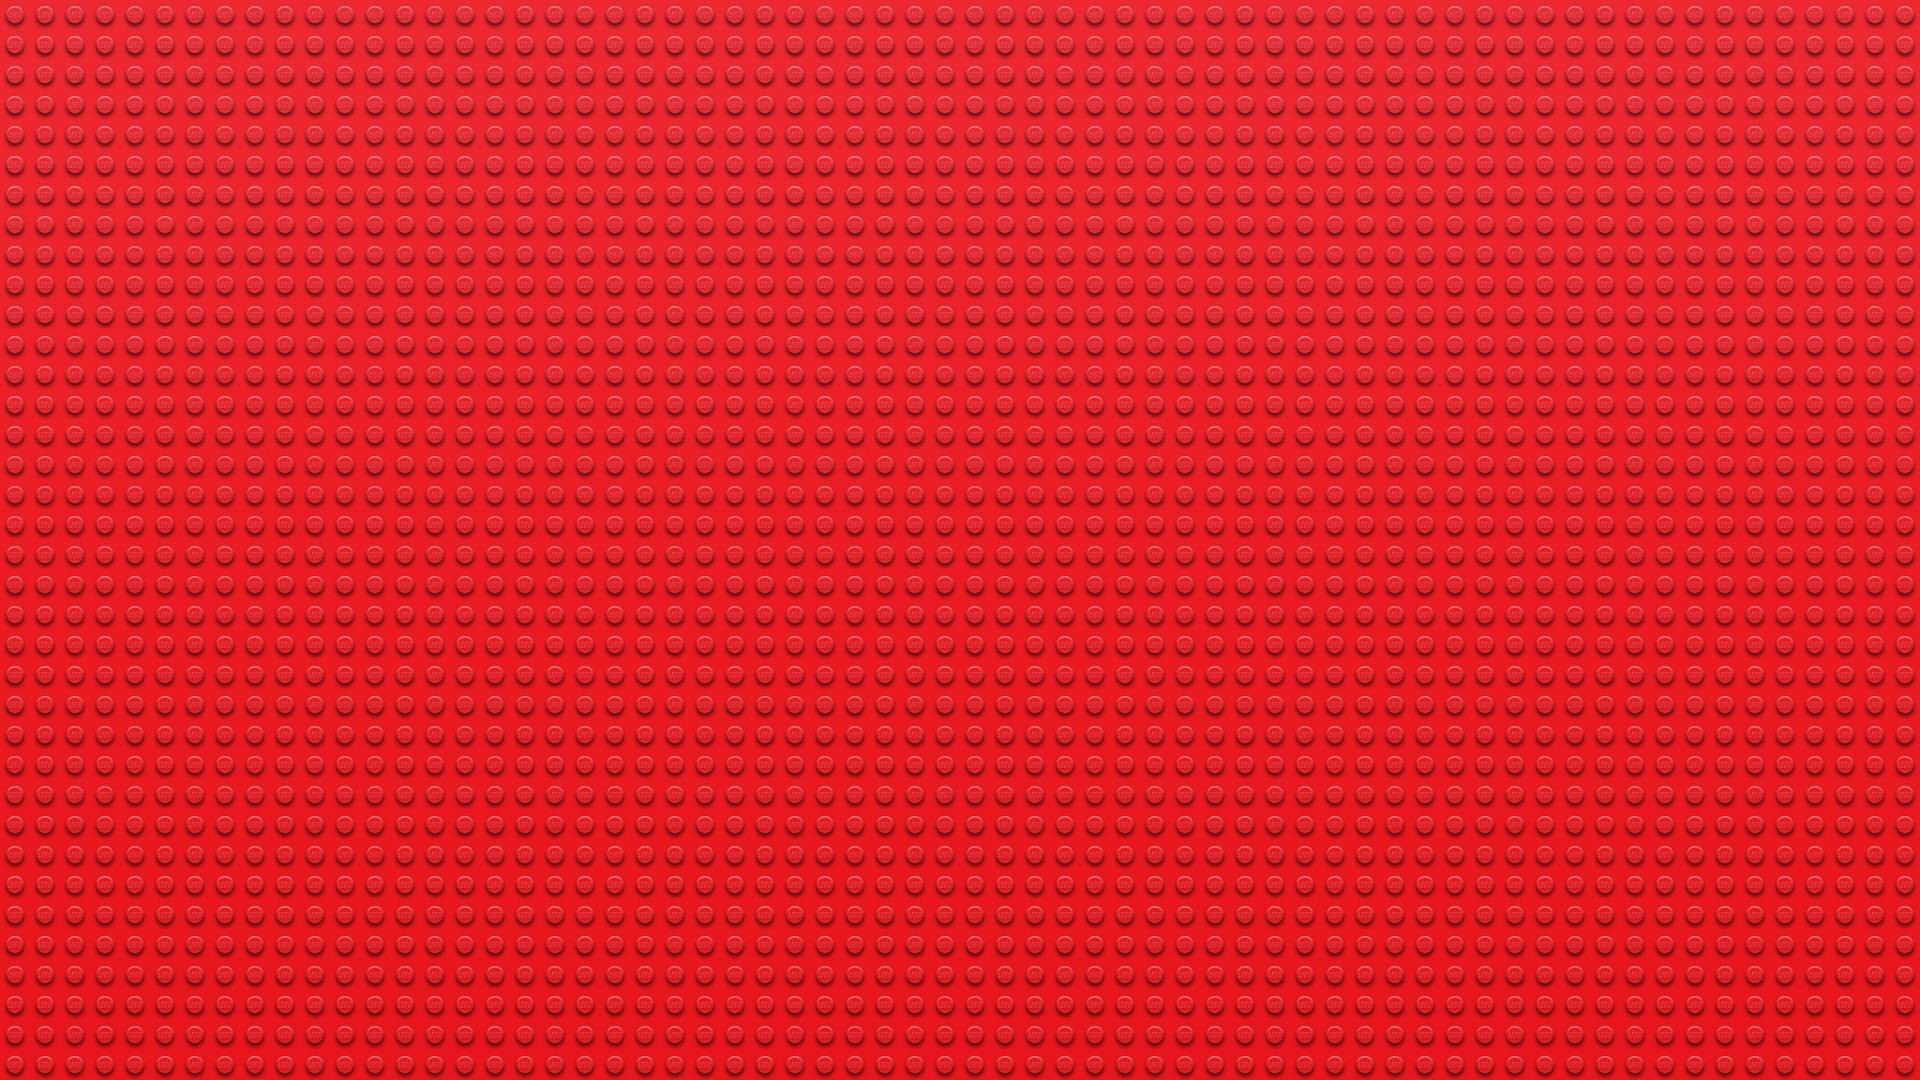 1920x1080 Red Studs Lego wallpaper - 964583